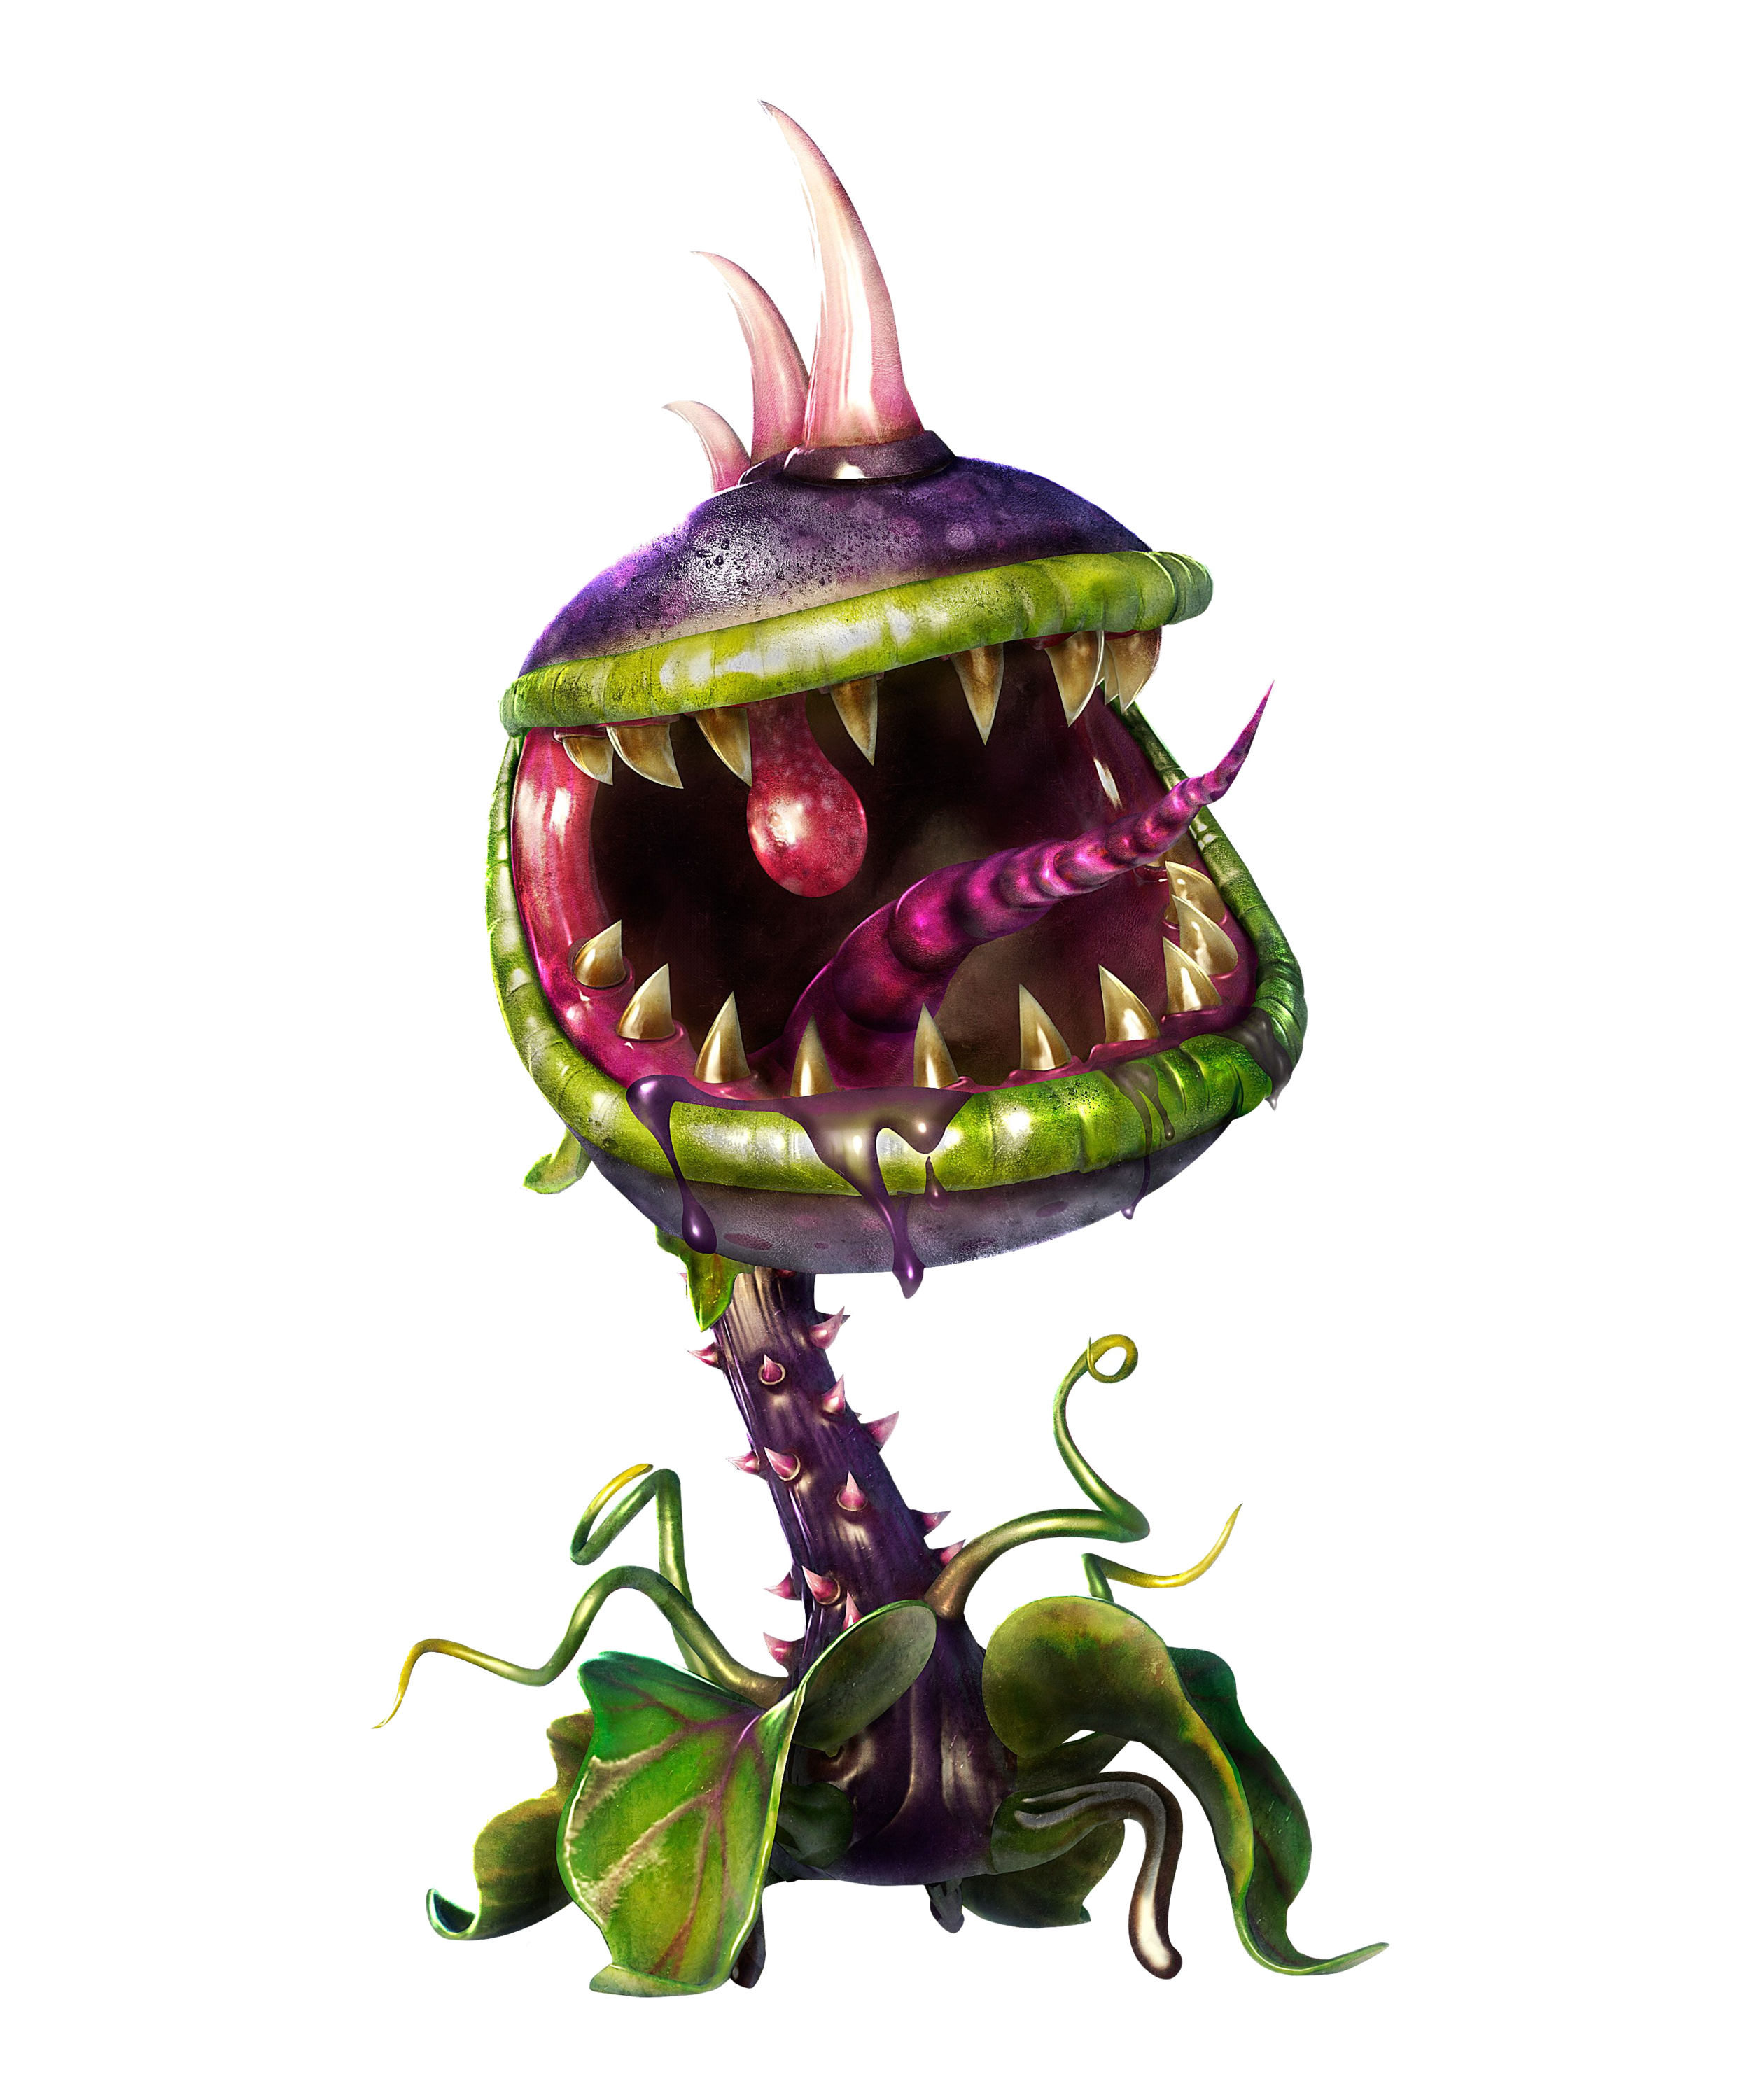 pvzgw2-embed-image-character-chomper.png